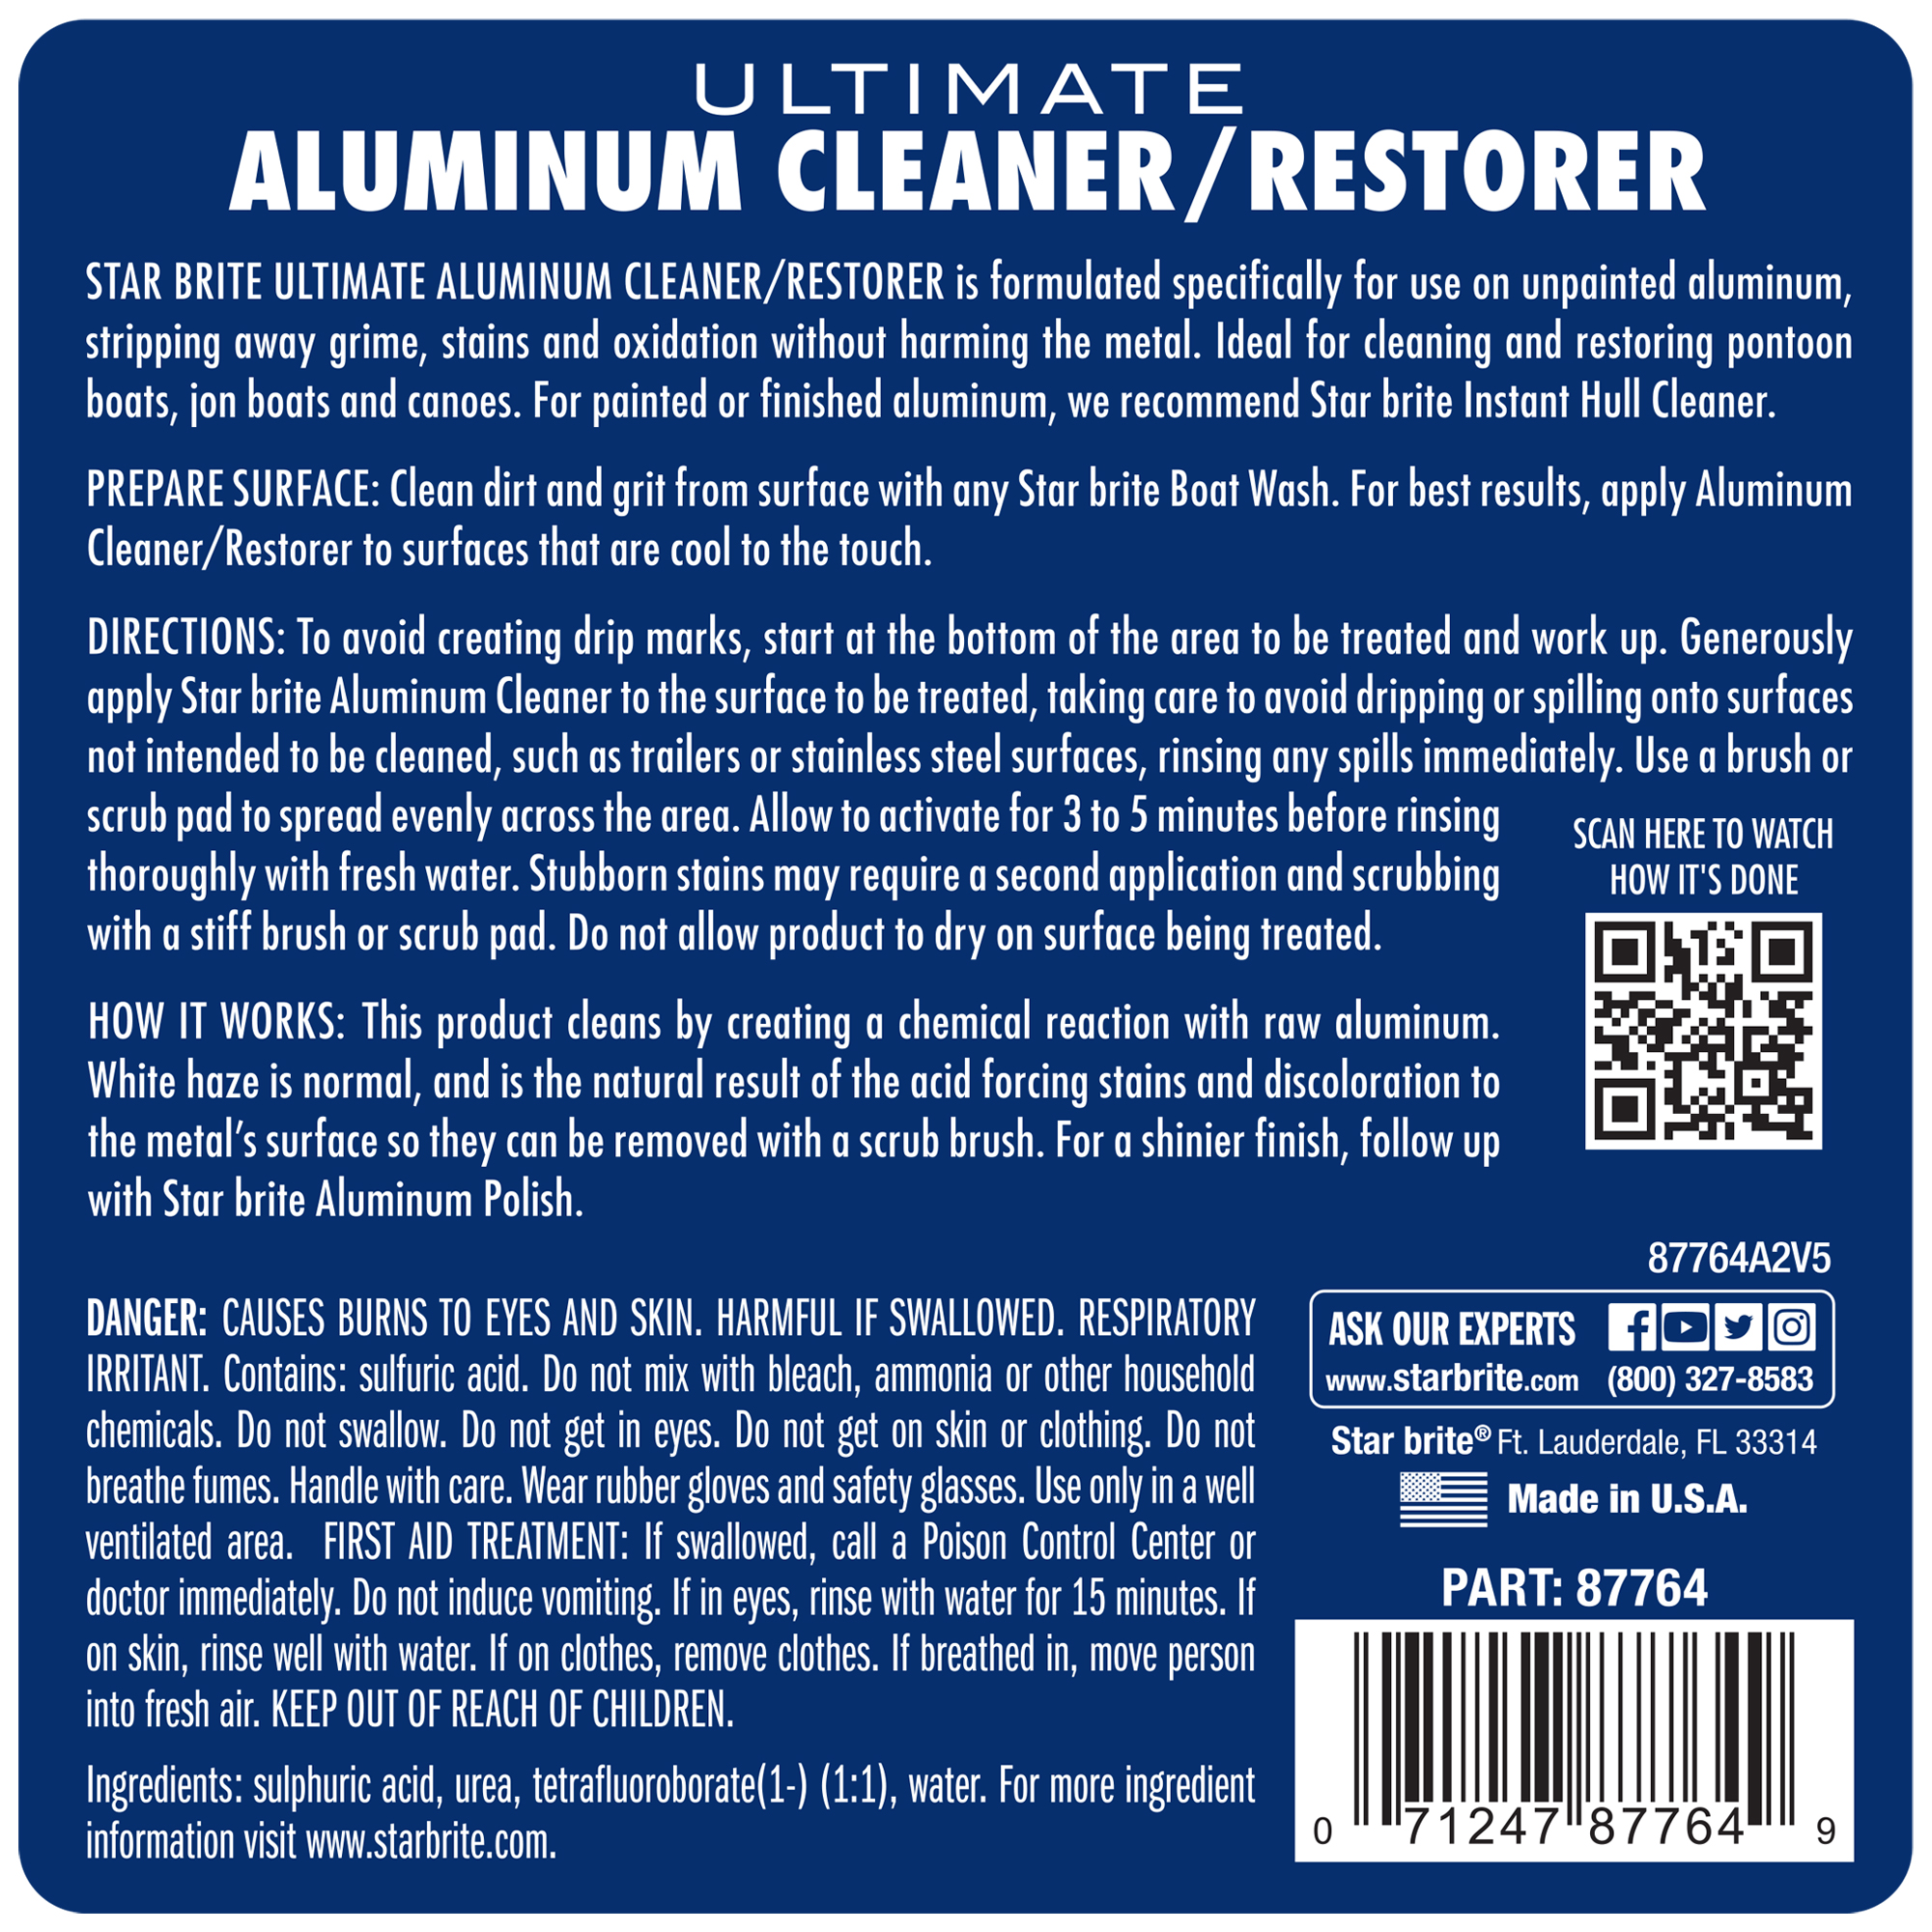 STAR BRITE Ultimate Aluminum Cleaner & Restorer - Aluminum Boat Cleaner - Perfect for Pontoon Boats, Jon Boats & Canoes (NO SPRAYER) - 64 OZ (087764) - image 4 of 4